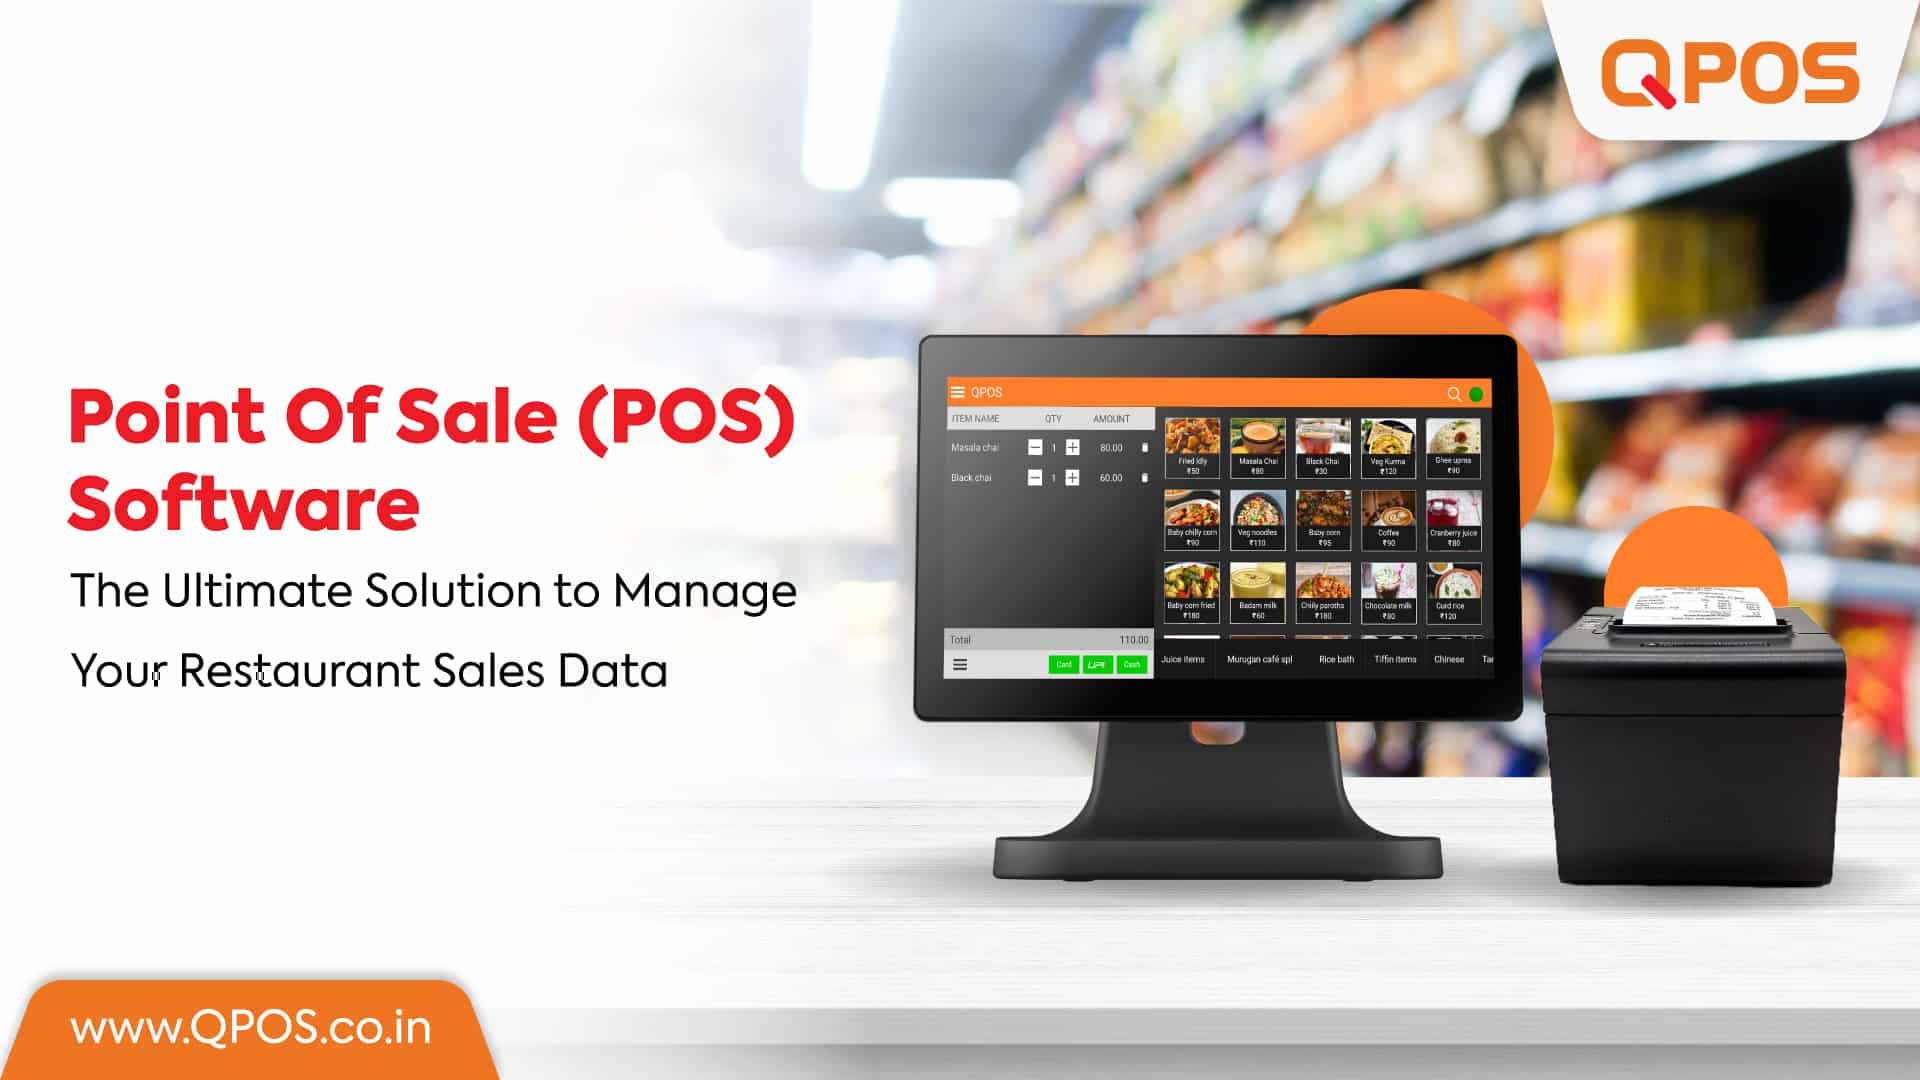 Restaurant POS to Manage Your Restaurant Sales Data